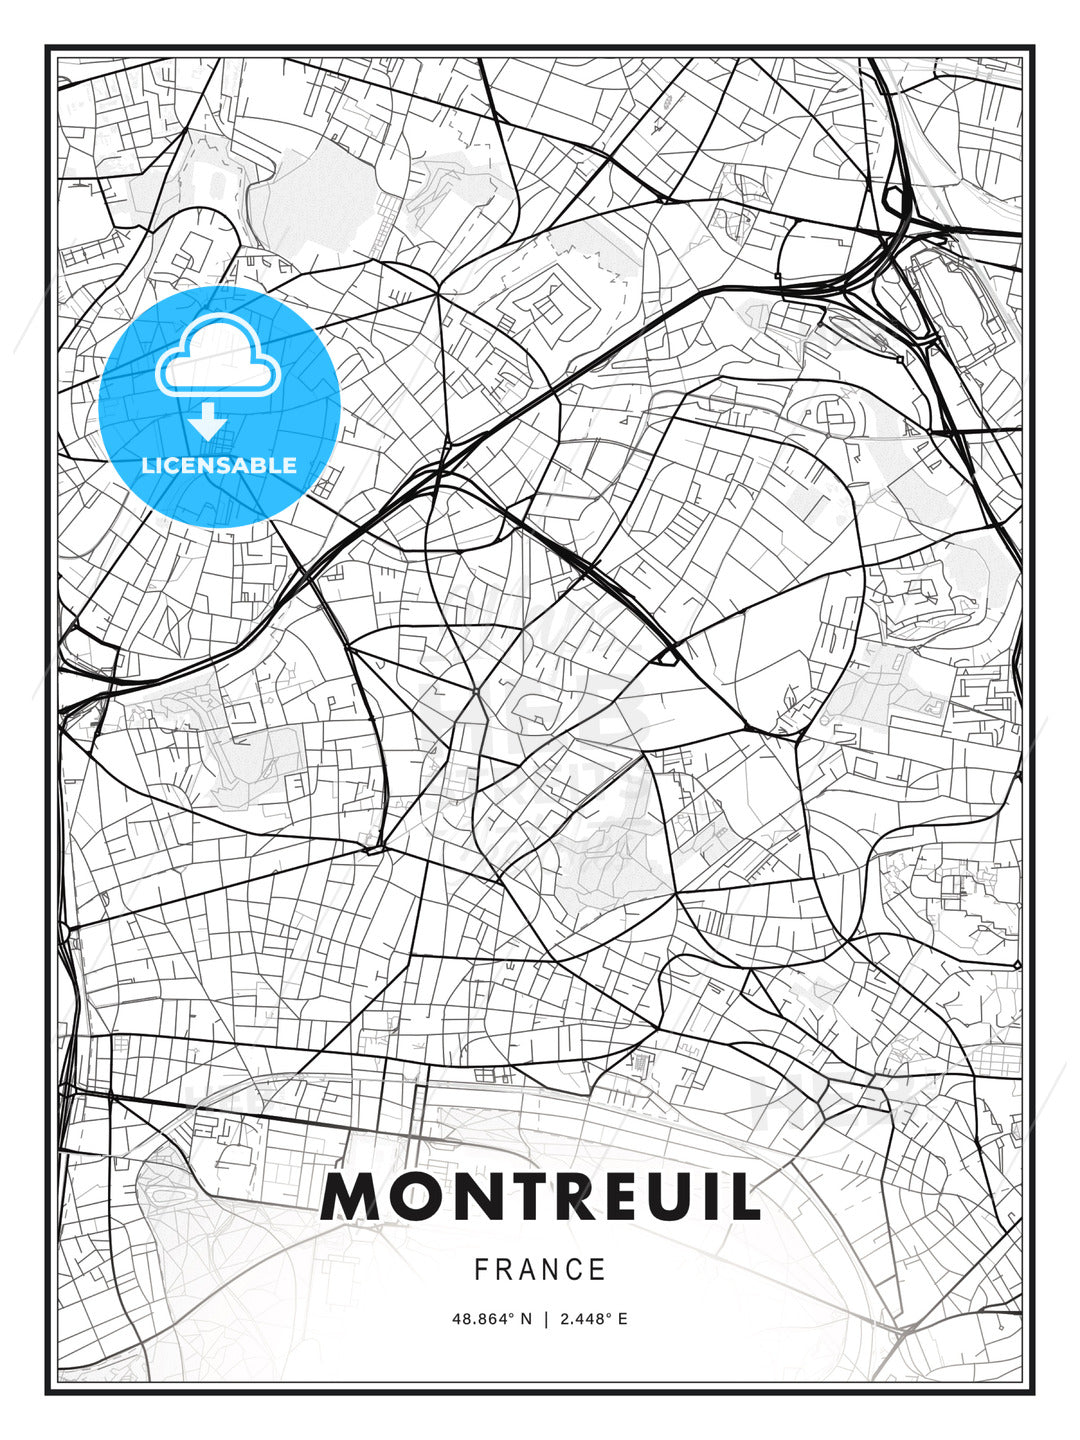 Montreuil, France, Modern Print Template in Various Formats - HEBSTREITS Sketches